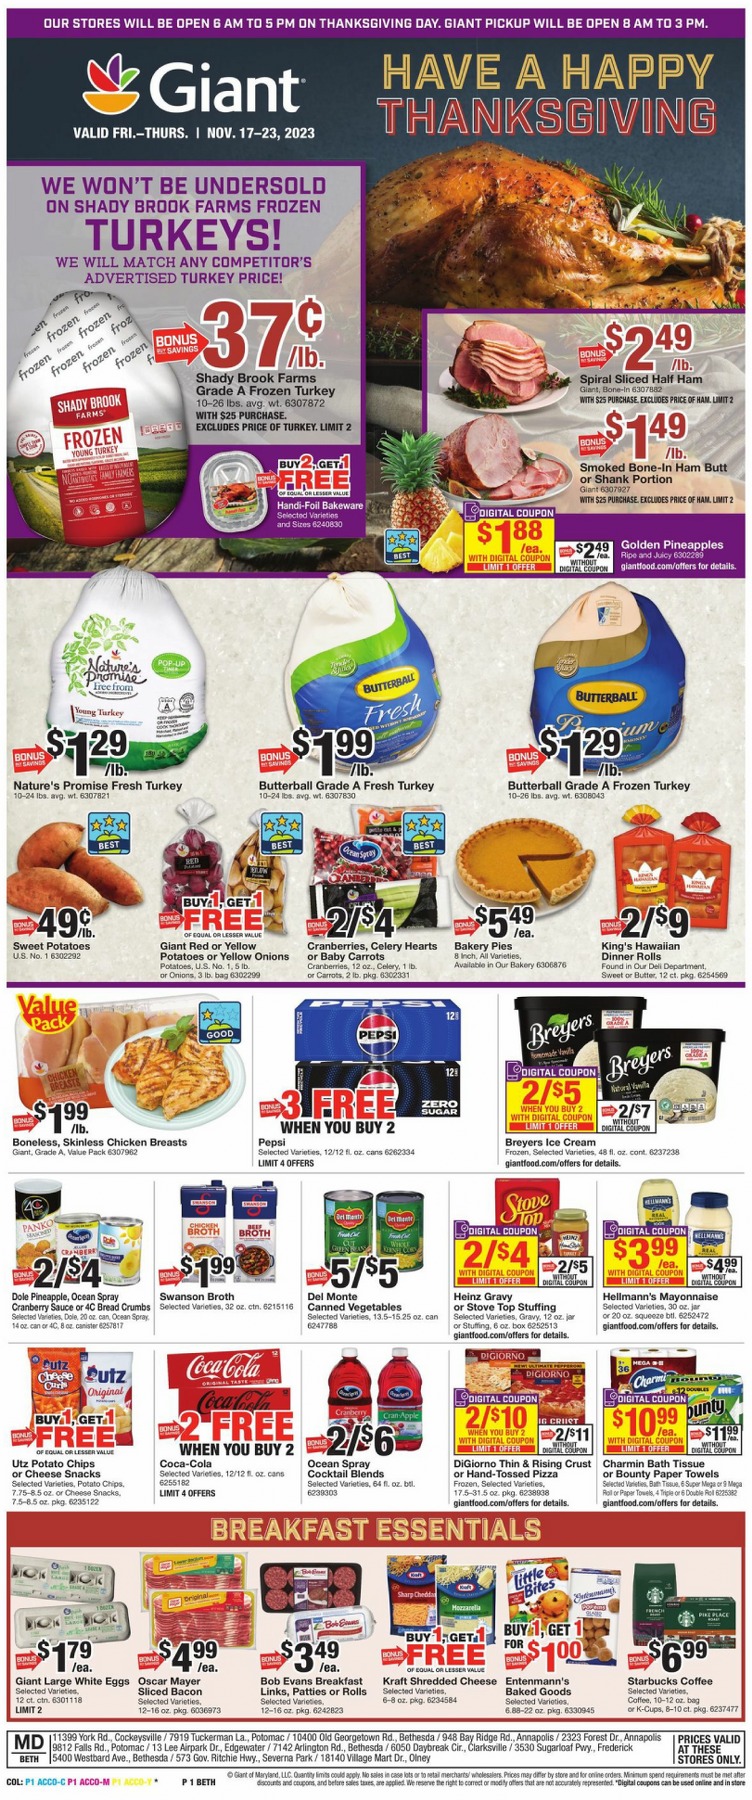 Giant Food Christmas Deals 2023 1 – giant food ad 1 1